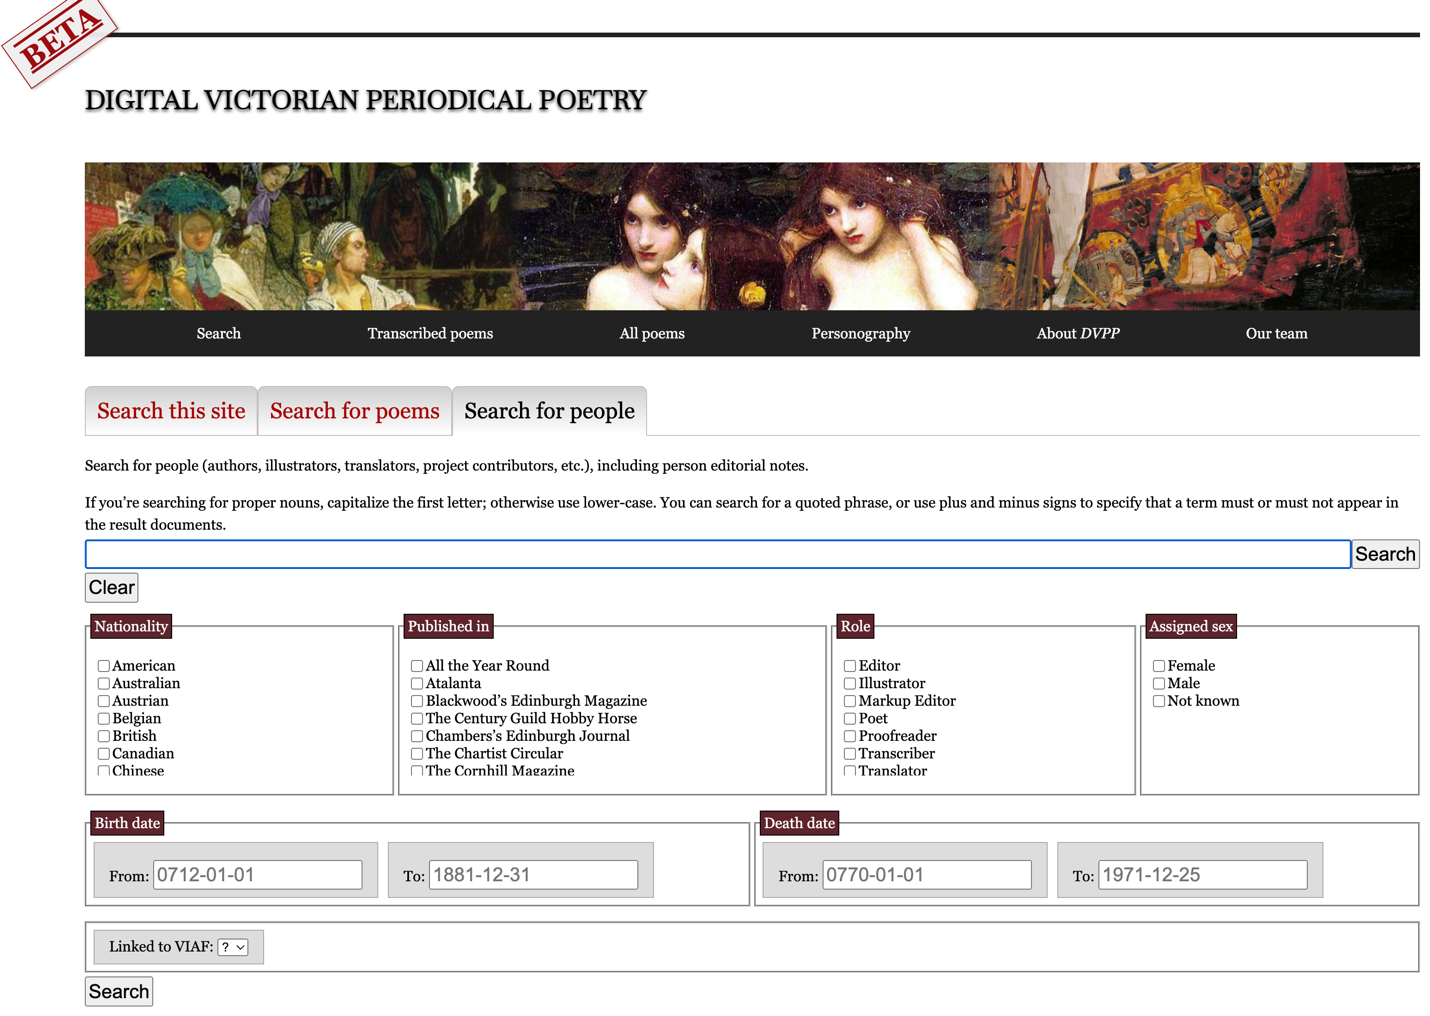 Partial view of the “Search for People” page in Digital Victorian Periodical Poetry (https://dvpp.uvic.ca/searchPeople.html)